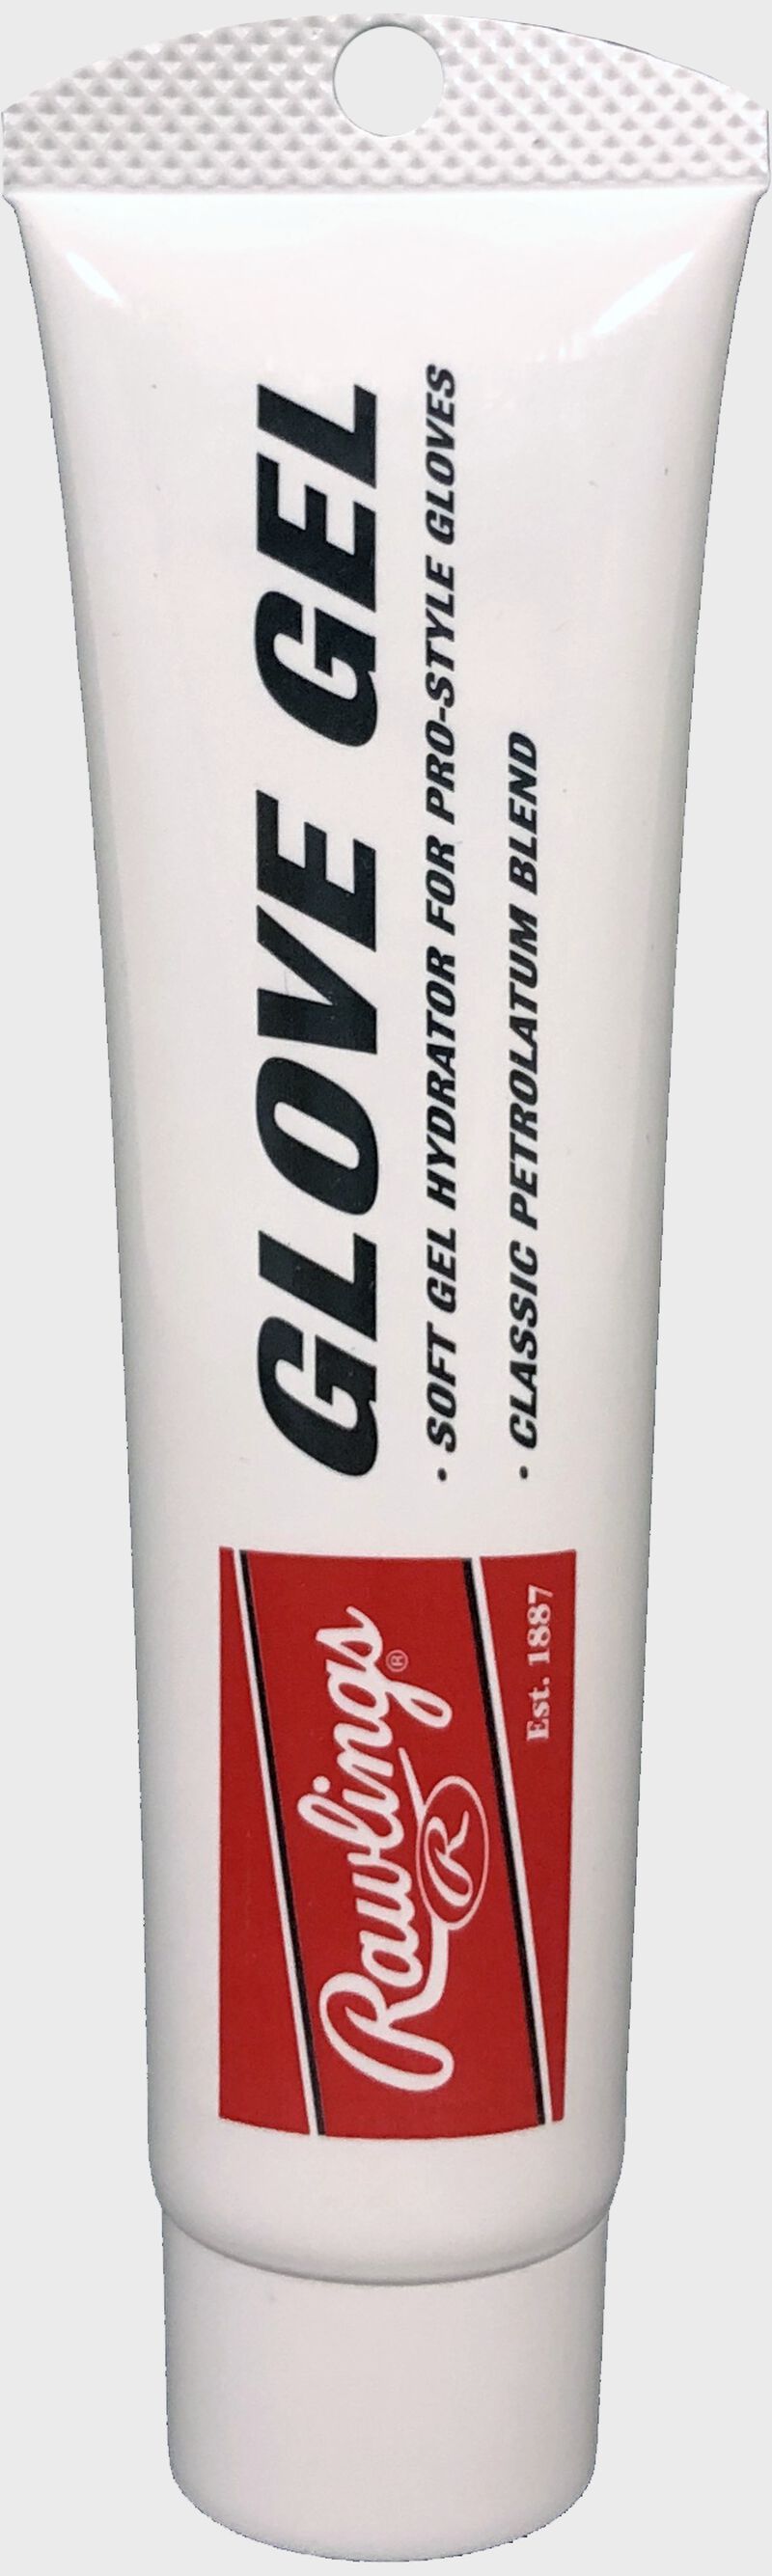 Rawlings Glove Gel Conditioner in a white tube GLVGEL